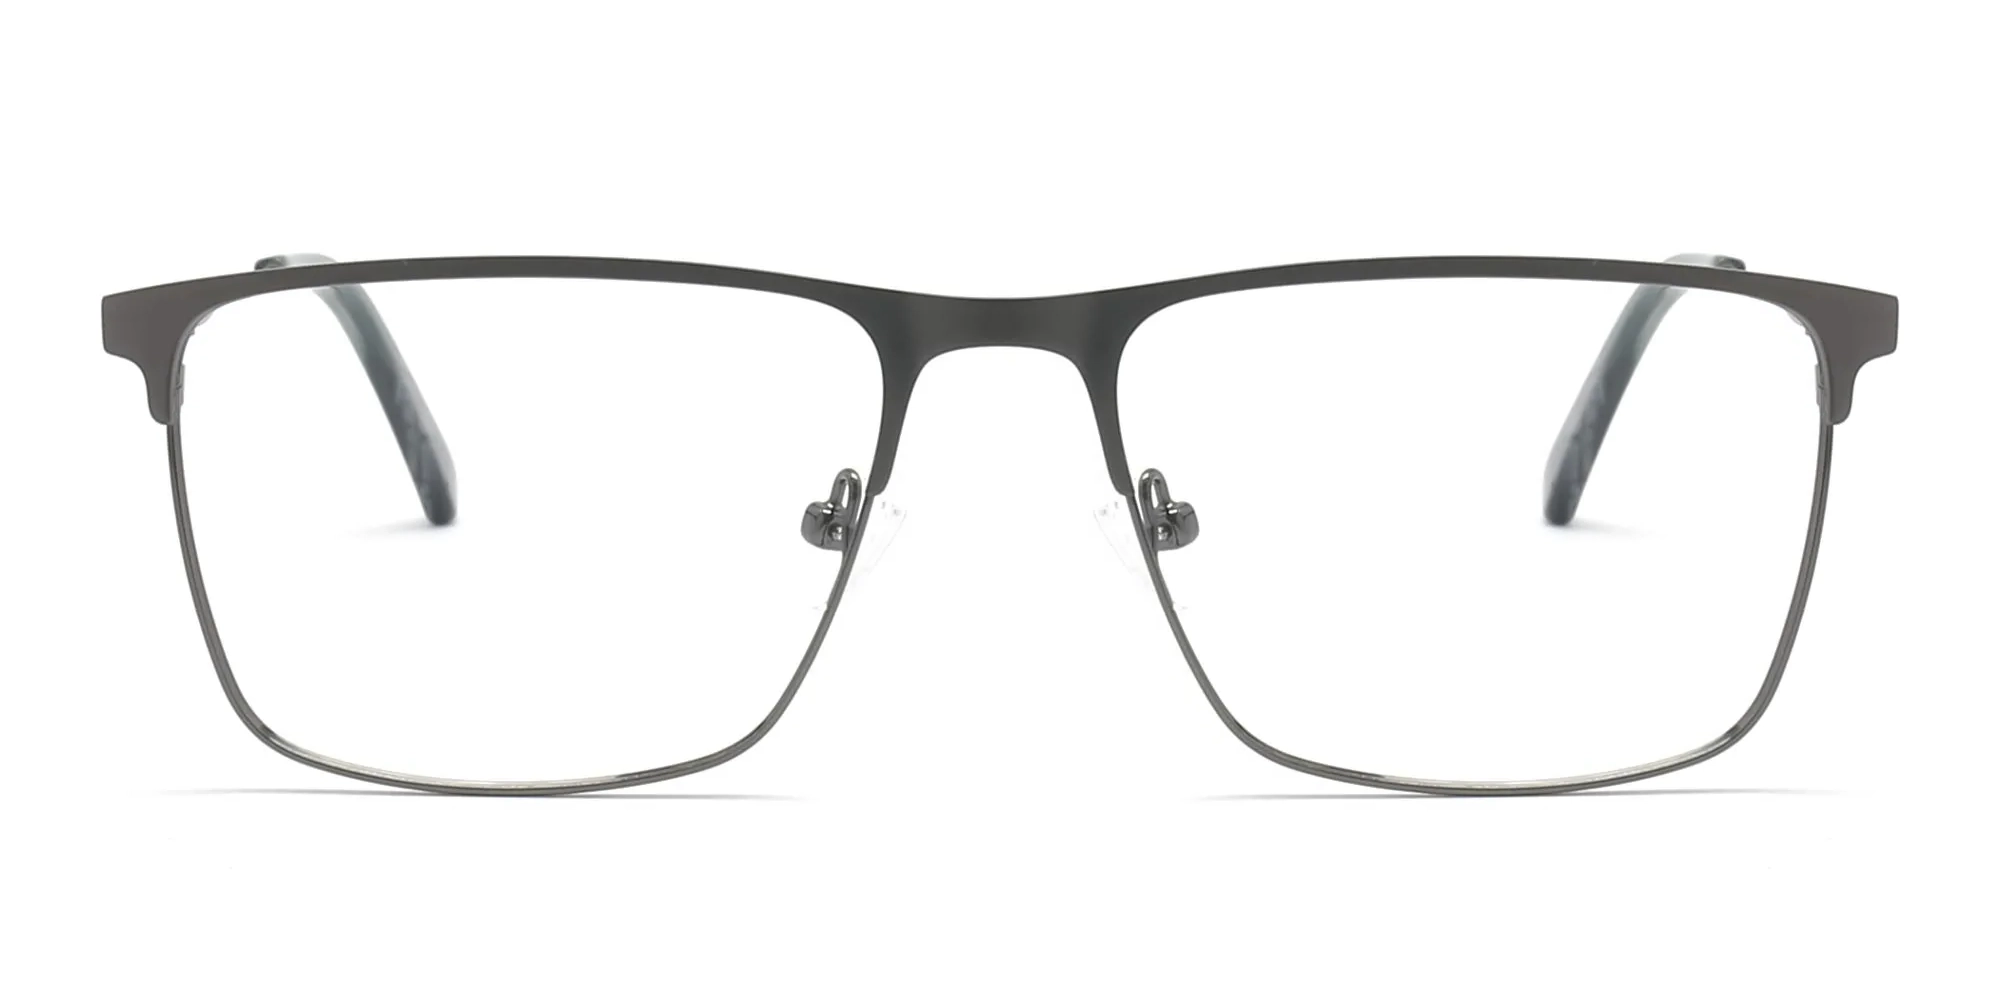 Stainless Steel Spectacle Frames-2